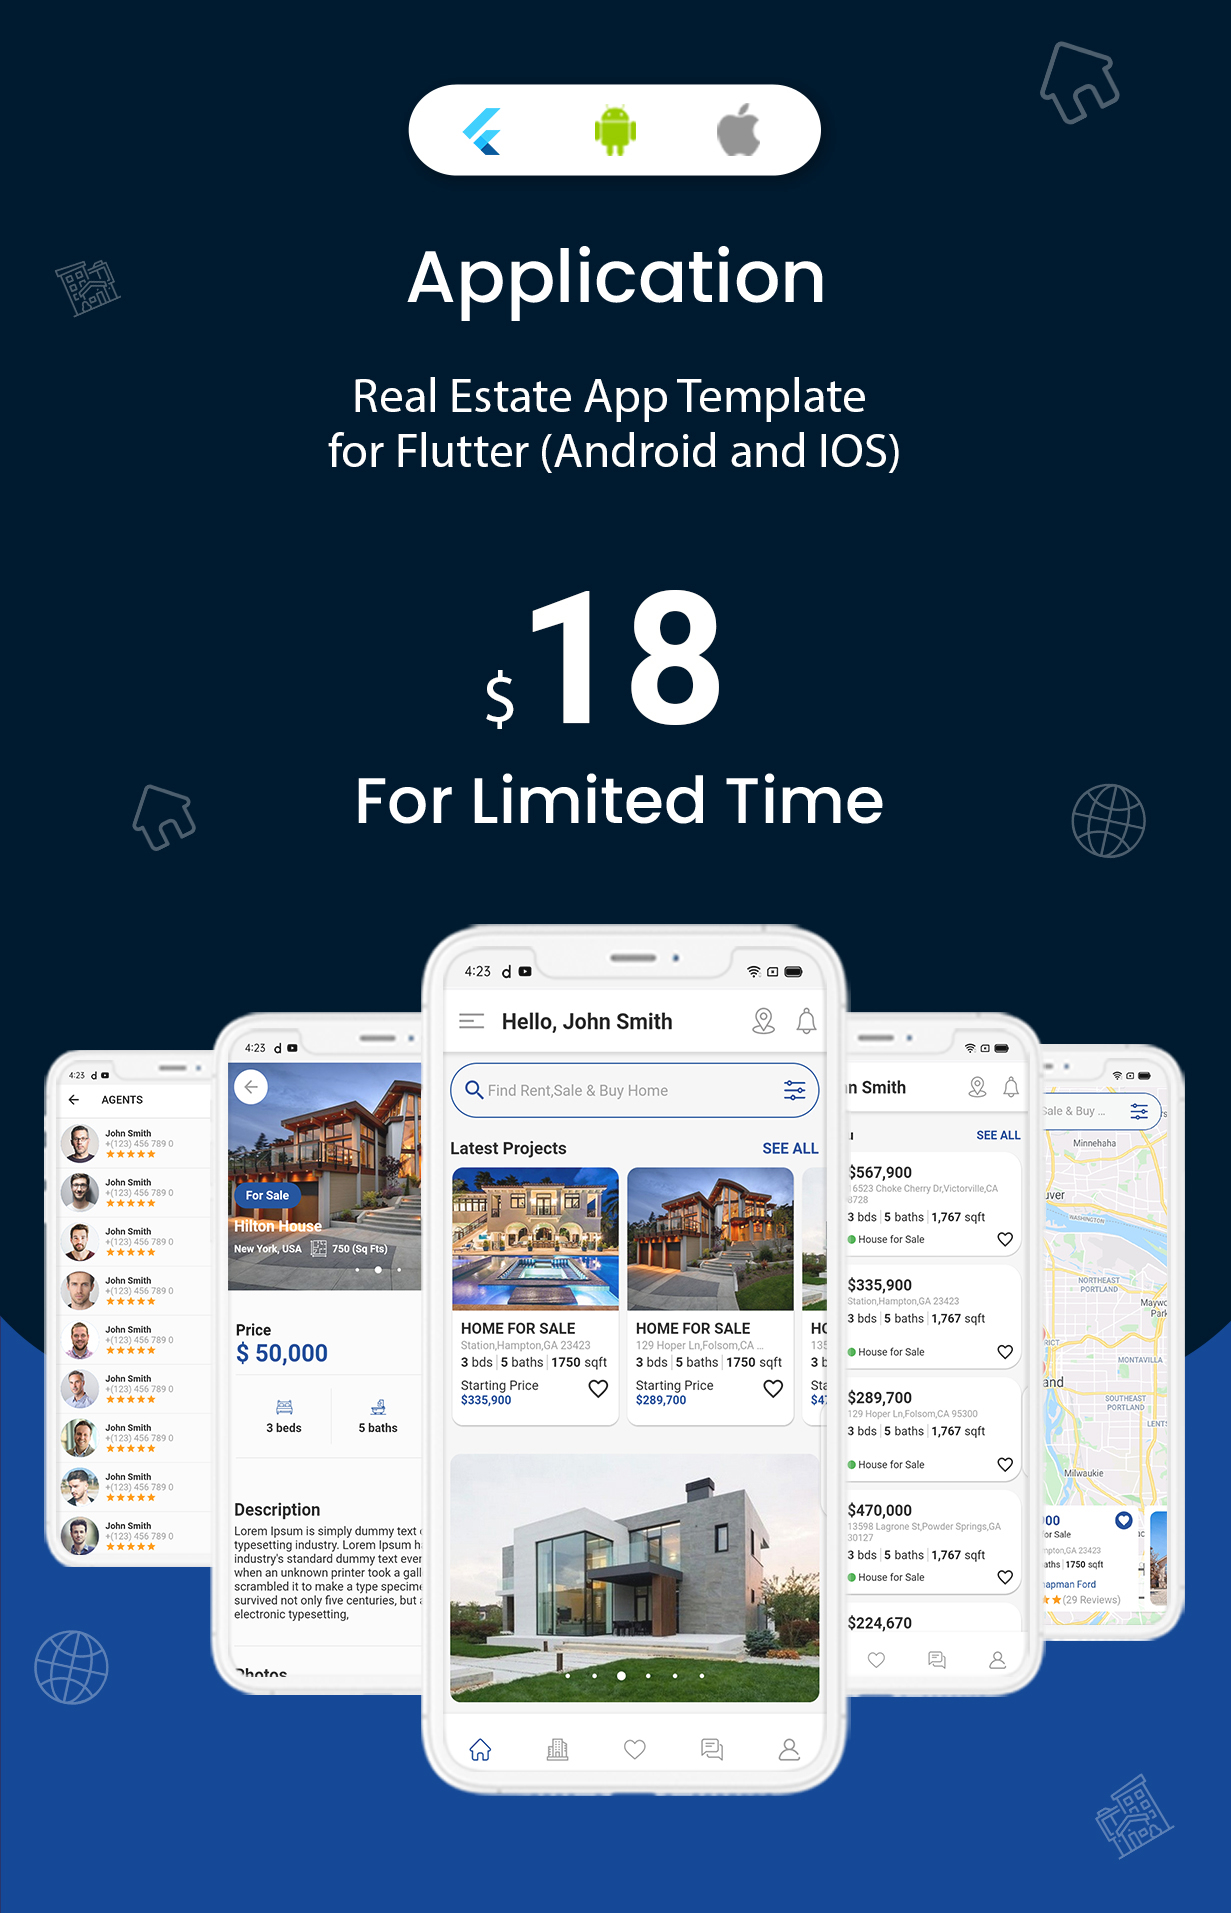 onProperty - Real Estate App Template for Flutter (Android and IOS) - 1